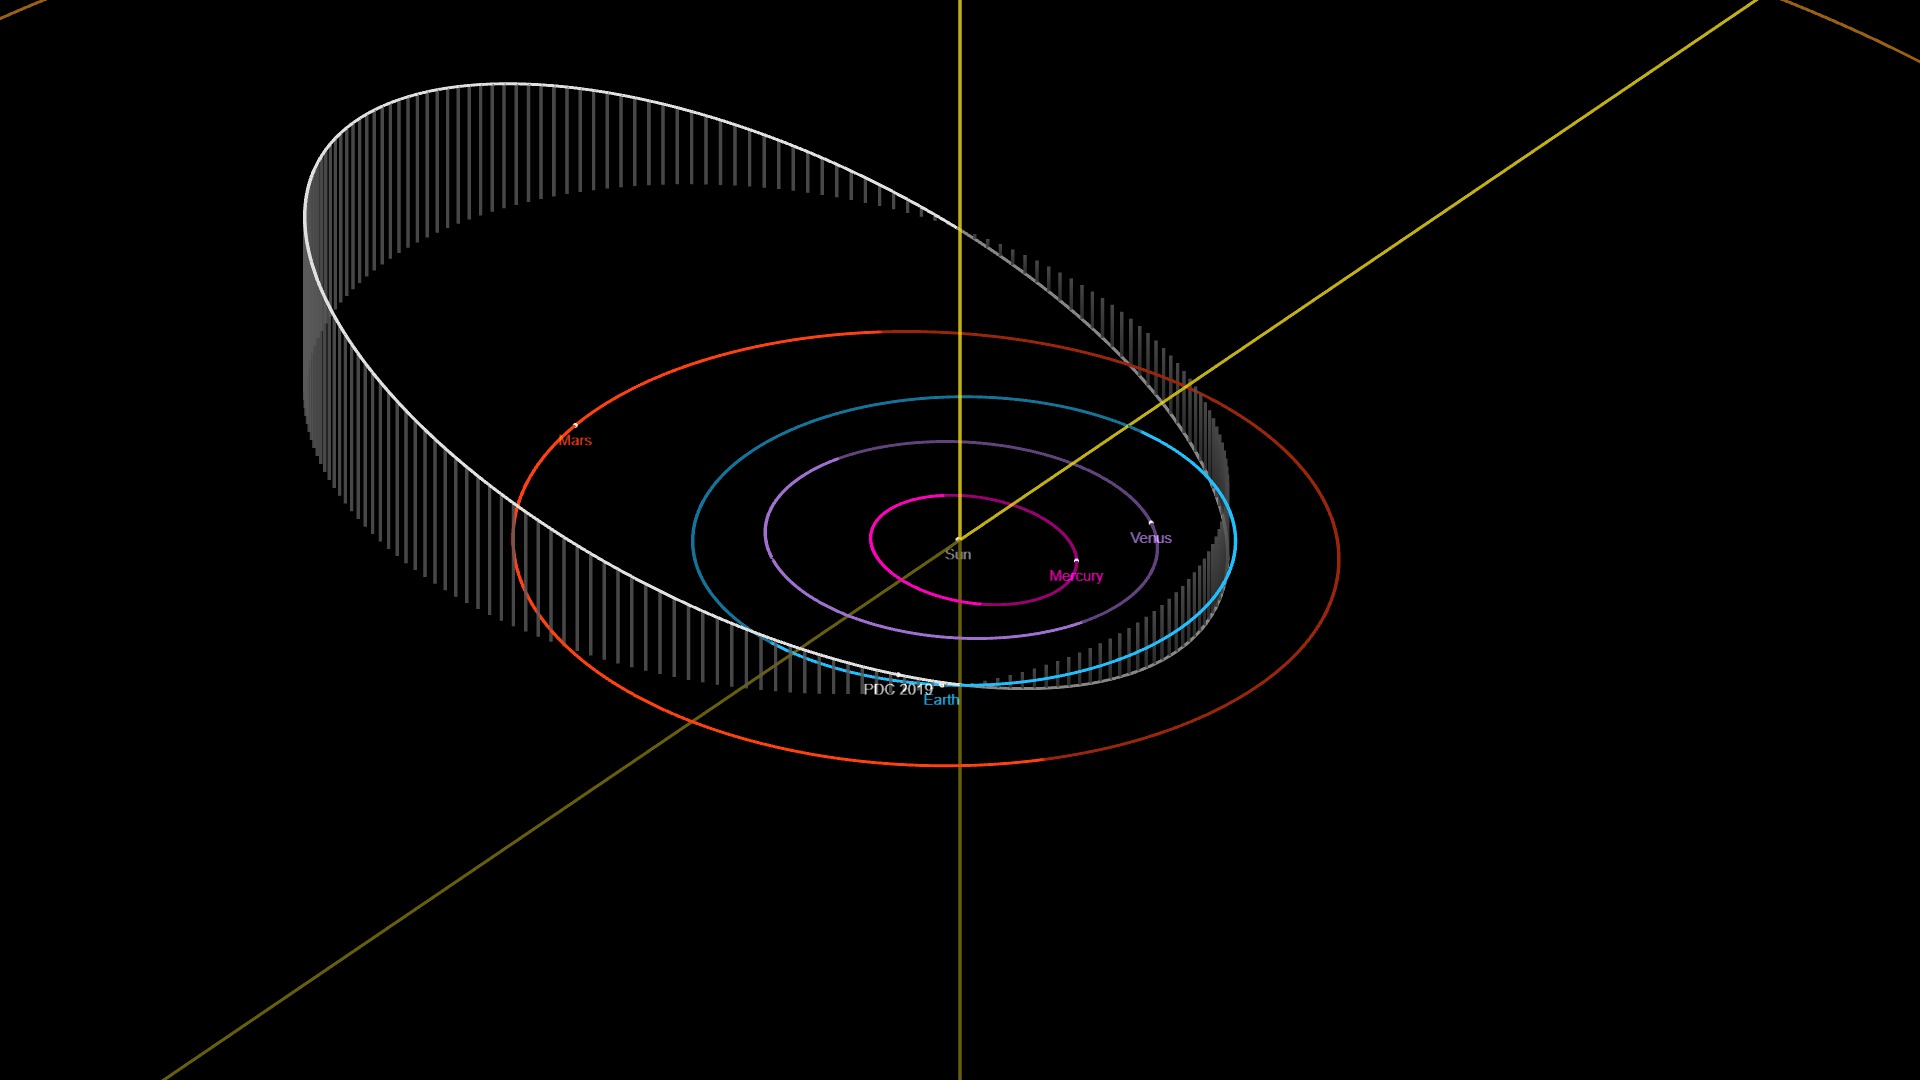 Rolling coverage: Brace for hypothetical asteroid impact – Rocket Science